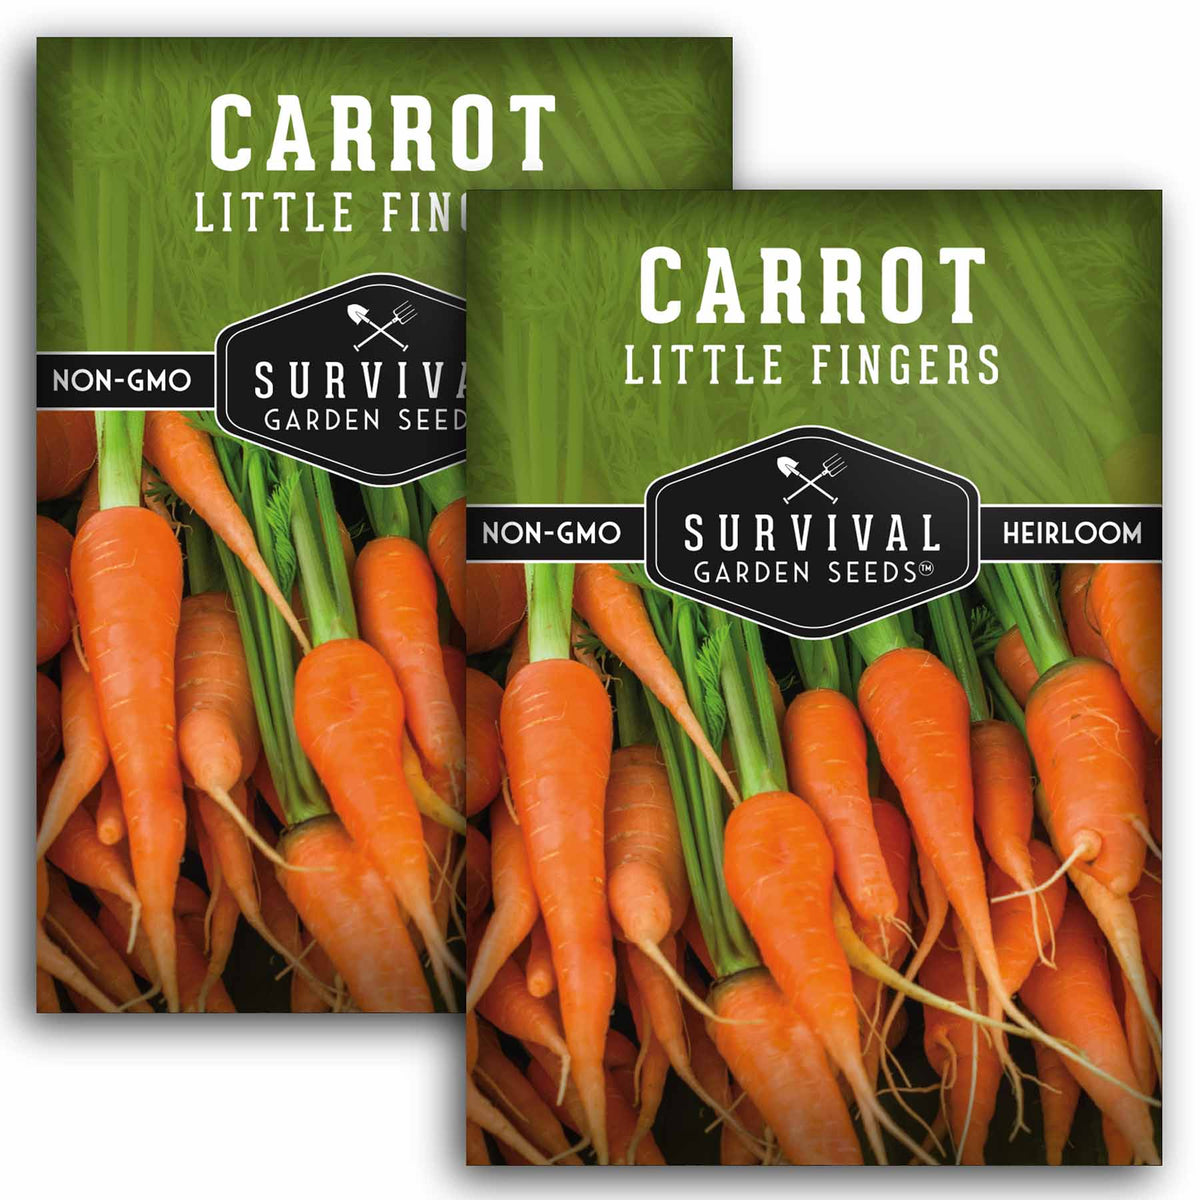 2 Packets of Little Fingers Carrot Seeds